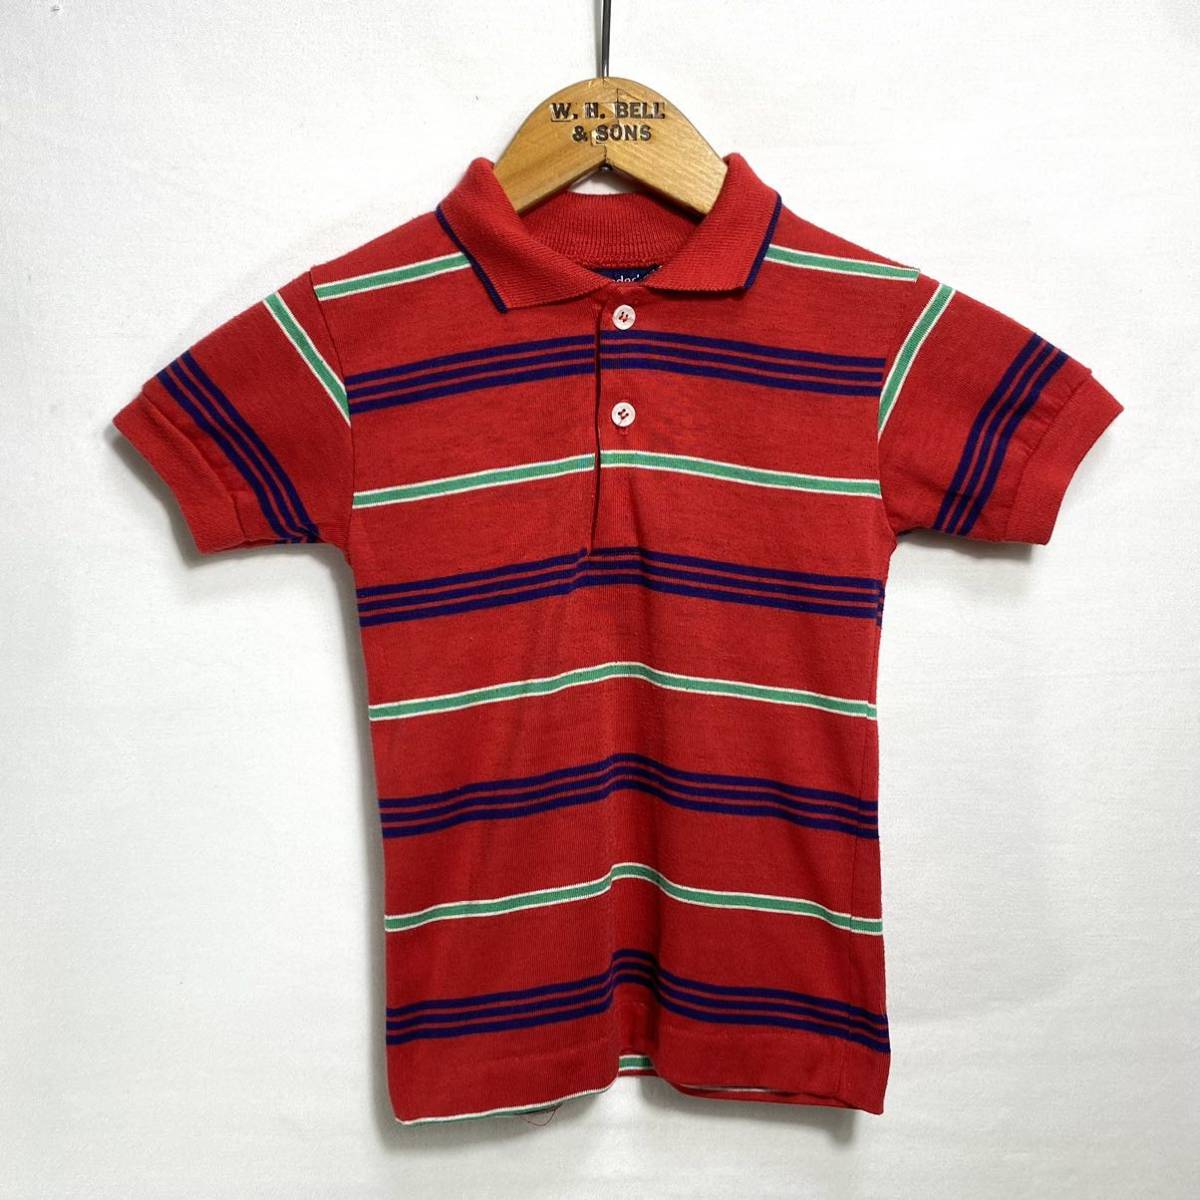 # for children Vintage USA made wonderknit design border pattern polo-shirt with short sleeves size 6 red American Casual trad ivy #